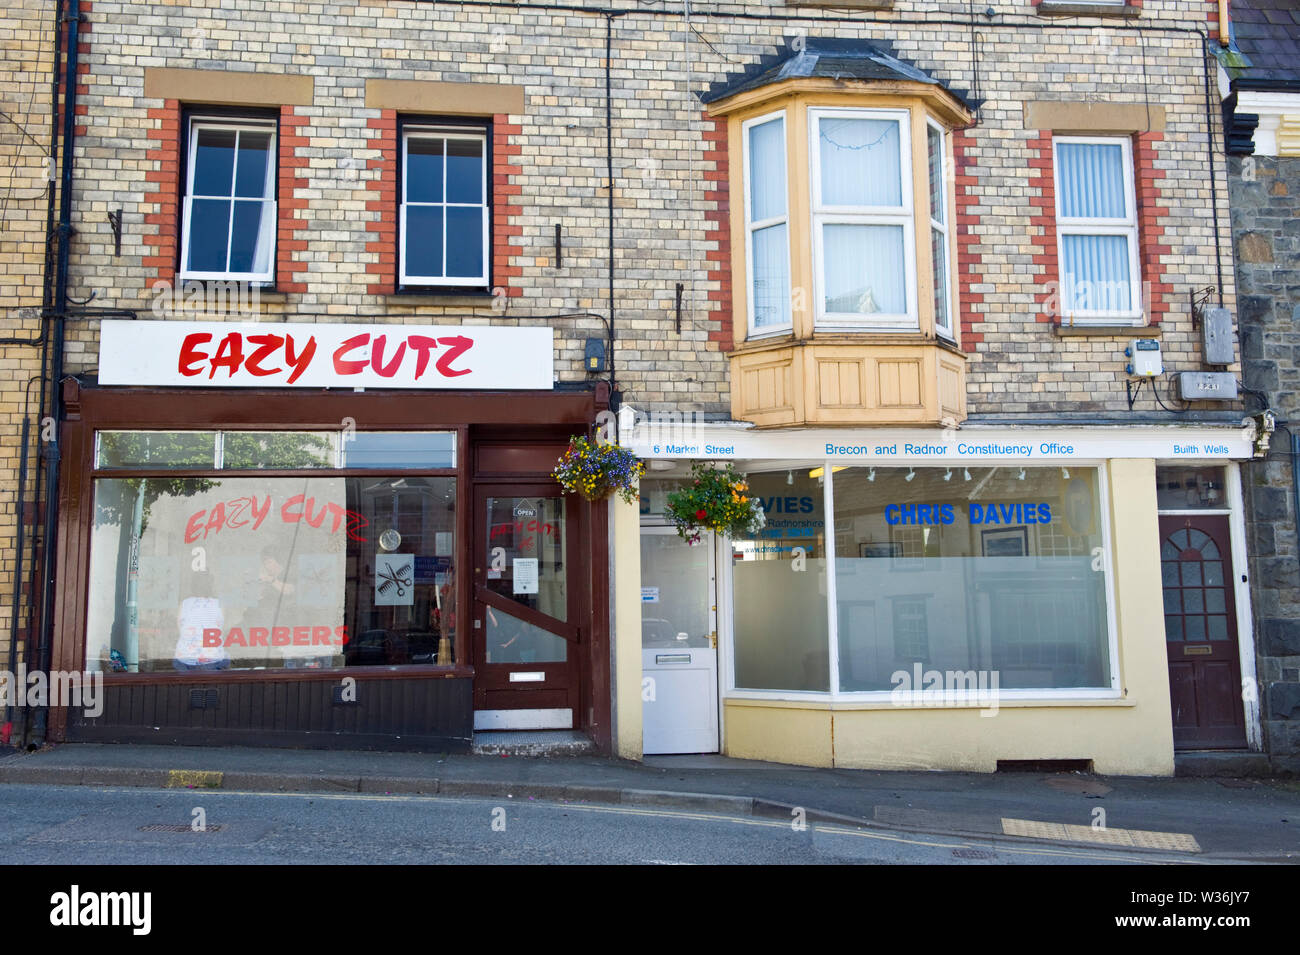 Constituency Office of Brecon & Radnor Conservative MP Chris Davies next to Eazy Cutz barbers in the town centre at Builth Wells Powys Wales UK Stock Photo